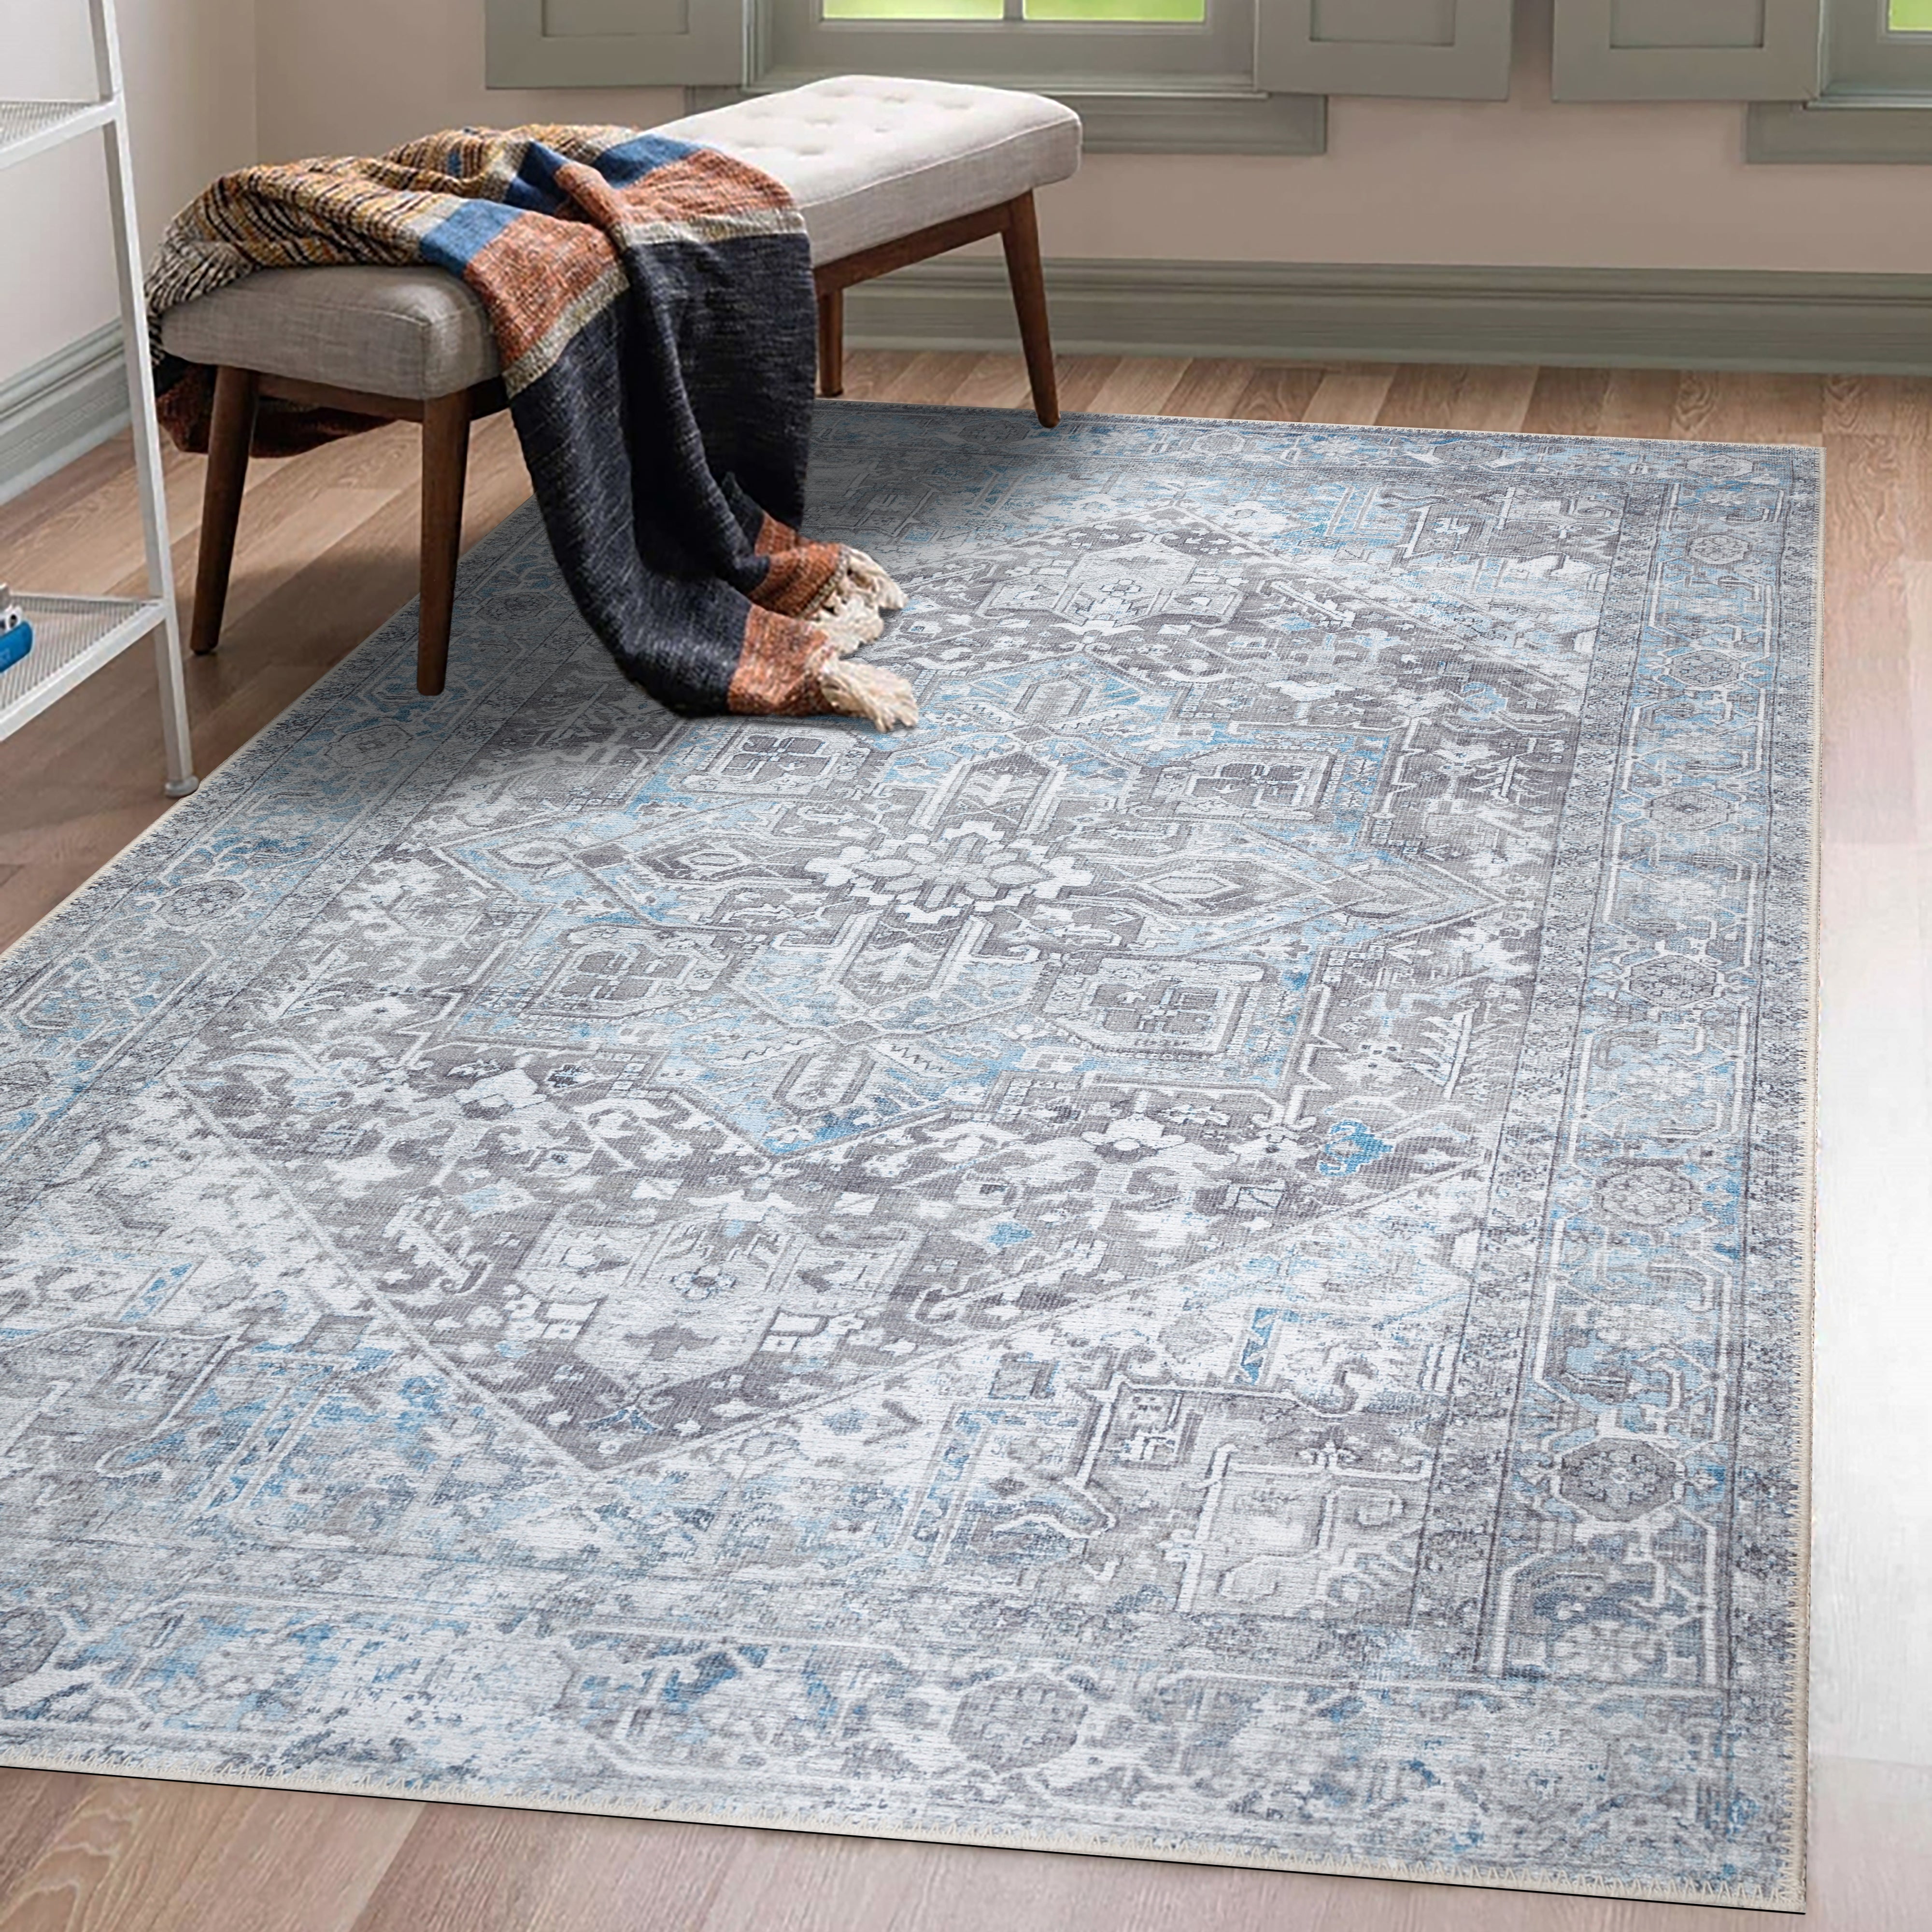 /products/memphis-nano-technology-rug